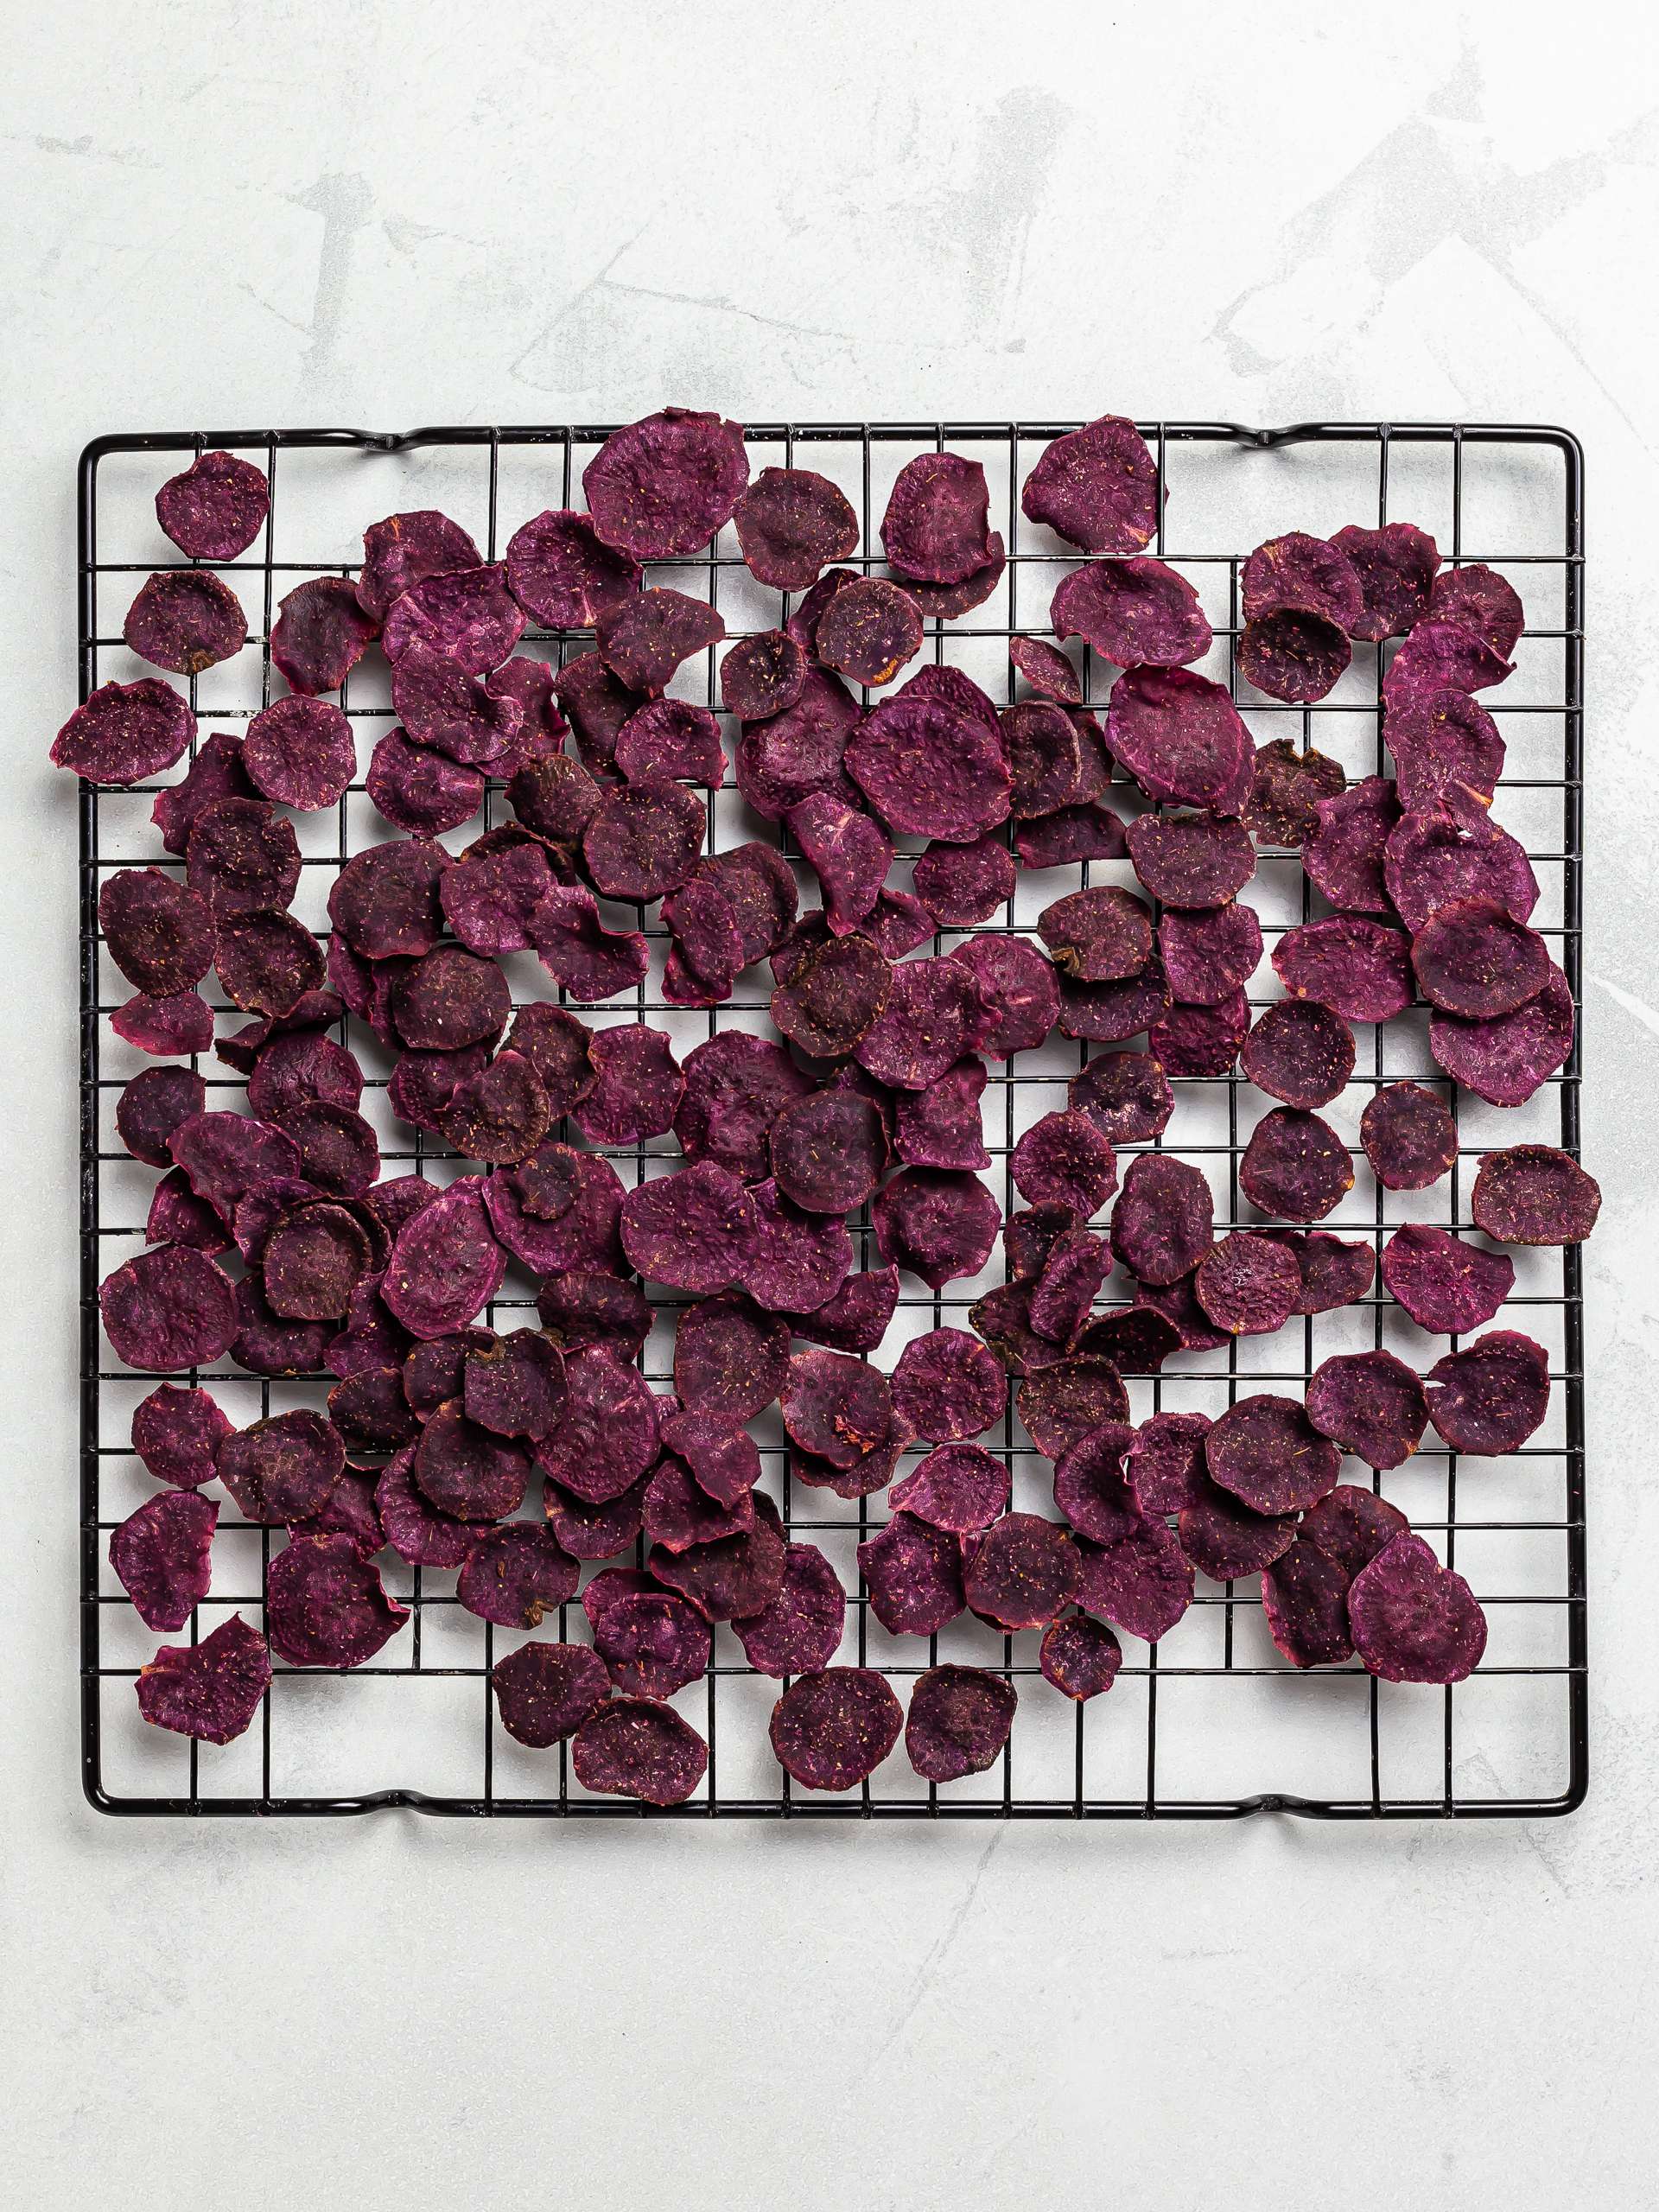 oven baked purple sweet potato chips on a rack